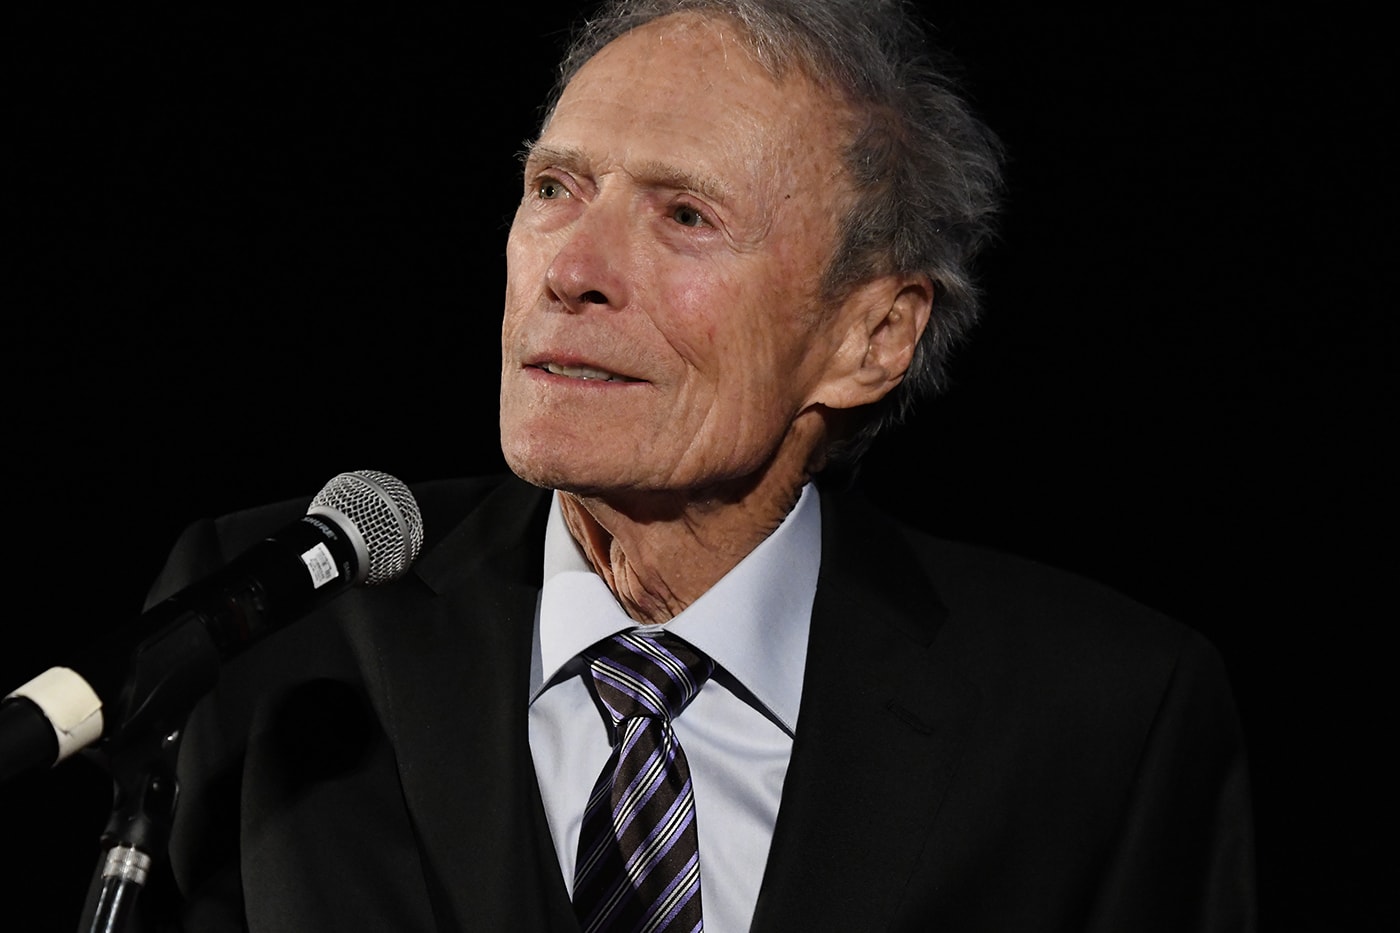 Clint Eastwood To Make Final Film of His Career at Warner Bros. scott eastwood actor director gran torino invictus sully american sniper david zaslav warner bros discovery hollywood juror #2 classic films iconic best top films